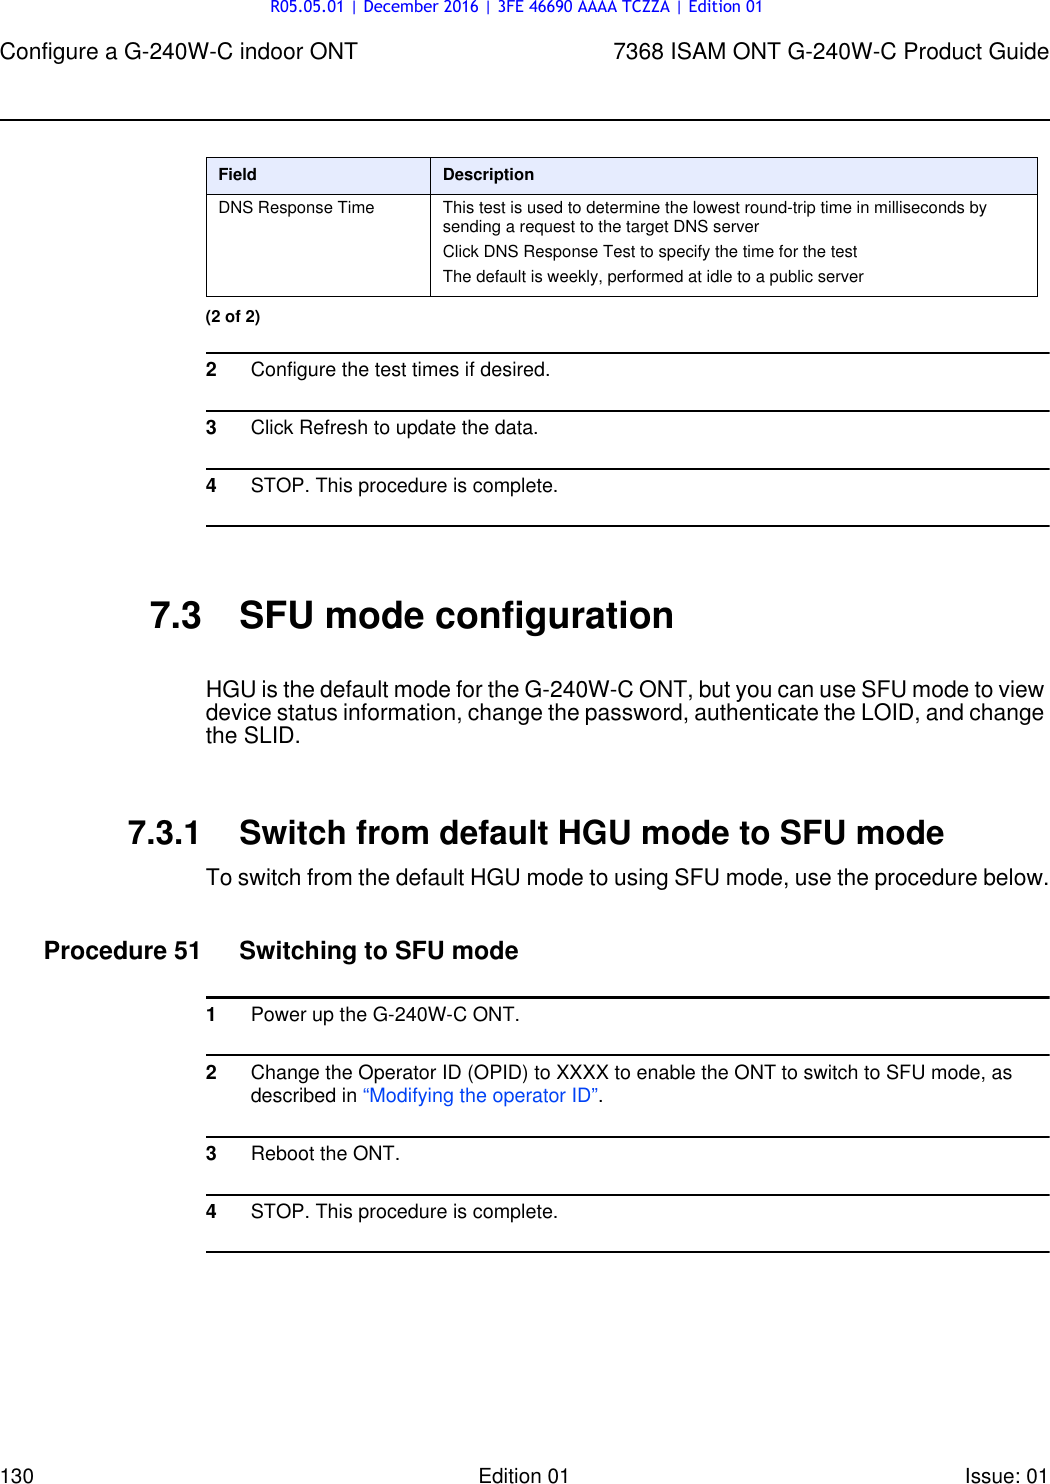 Page 130 of Nokia Bell G240W-C GPON ONU User Manual 7368 ISAM ONT G 240W B Product Guide